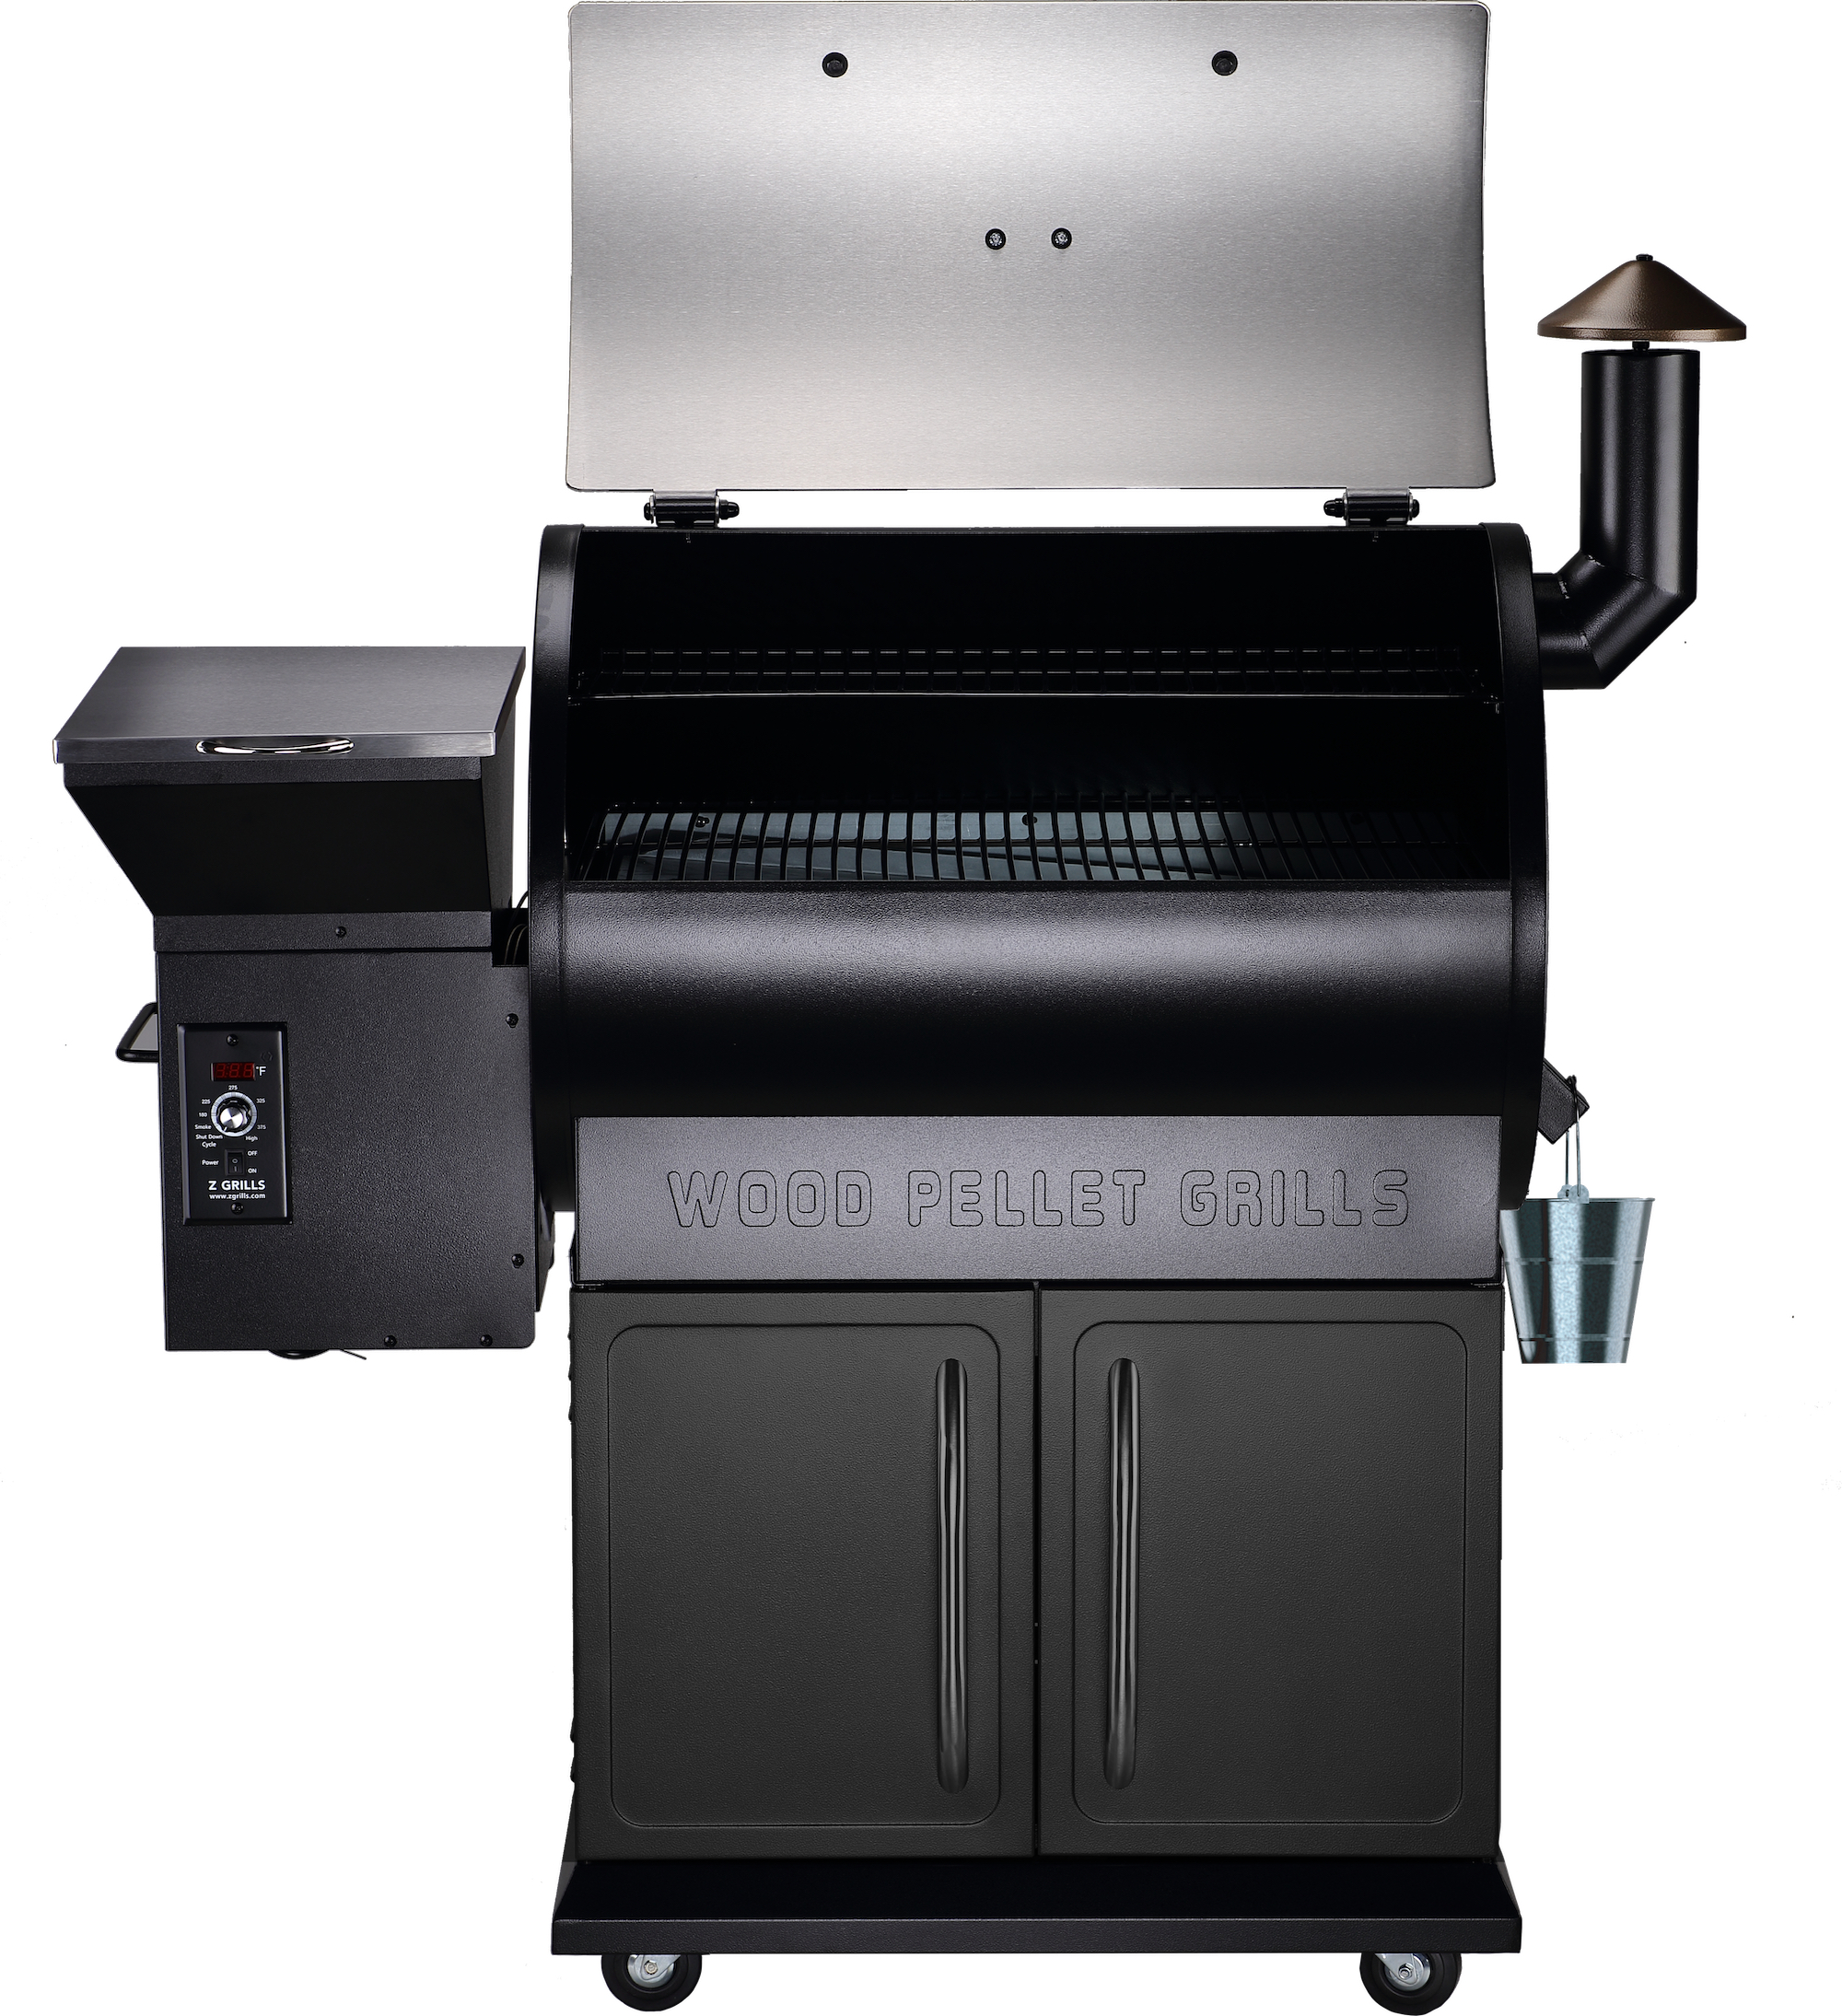 Z Grills ZPG-700E Wood Pellet Grill & Smoker 700 sq in 8 in 1 BBQ Auto Temperature 2020 Model Cover included in Stainless - image 2 of 10